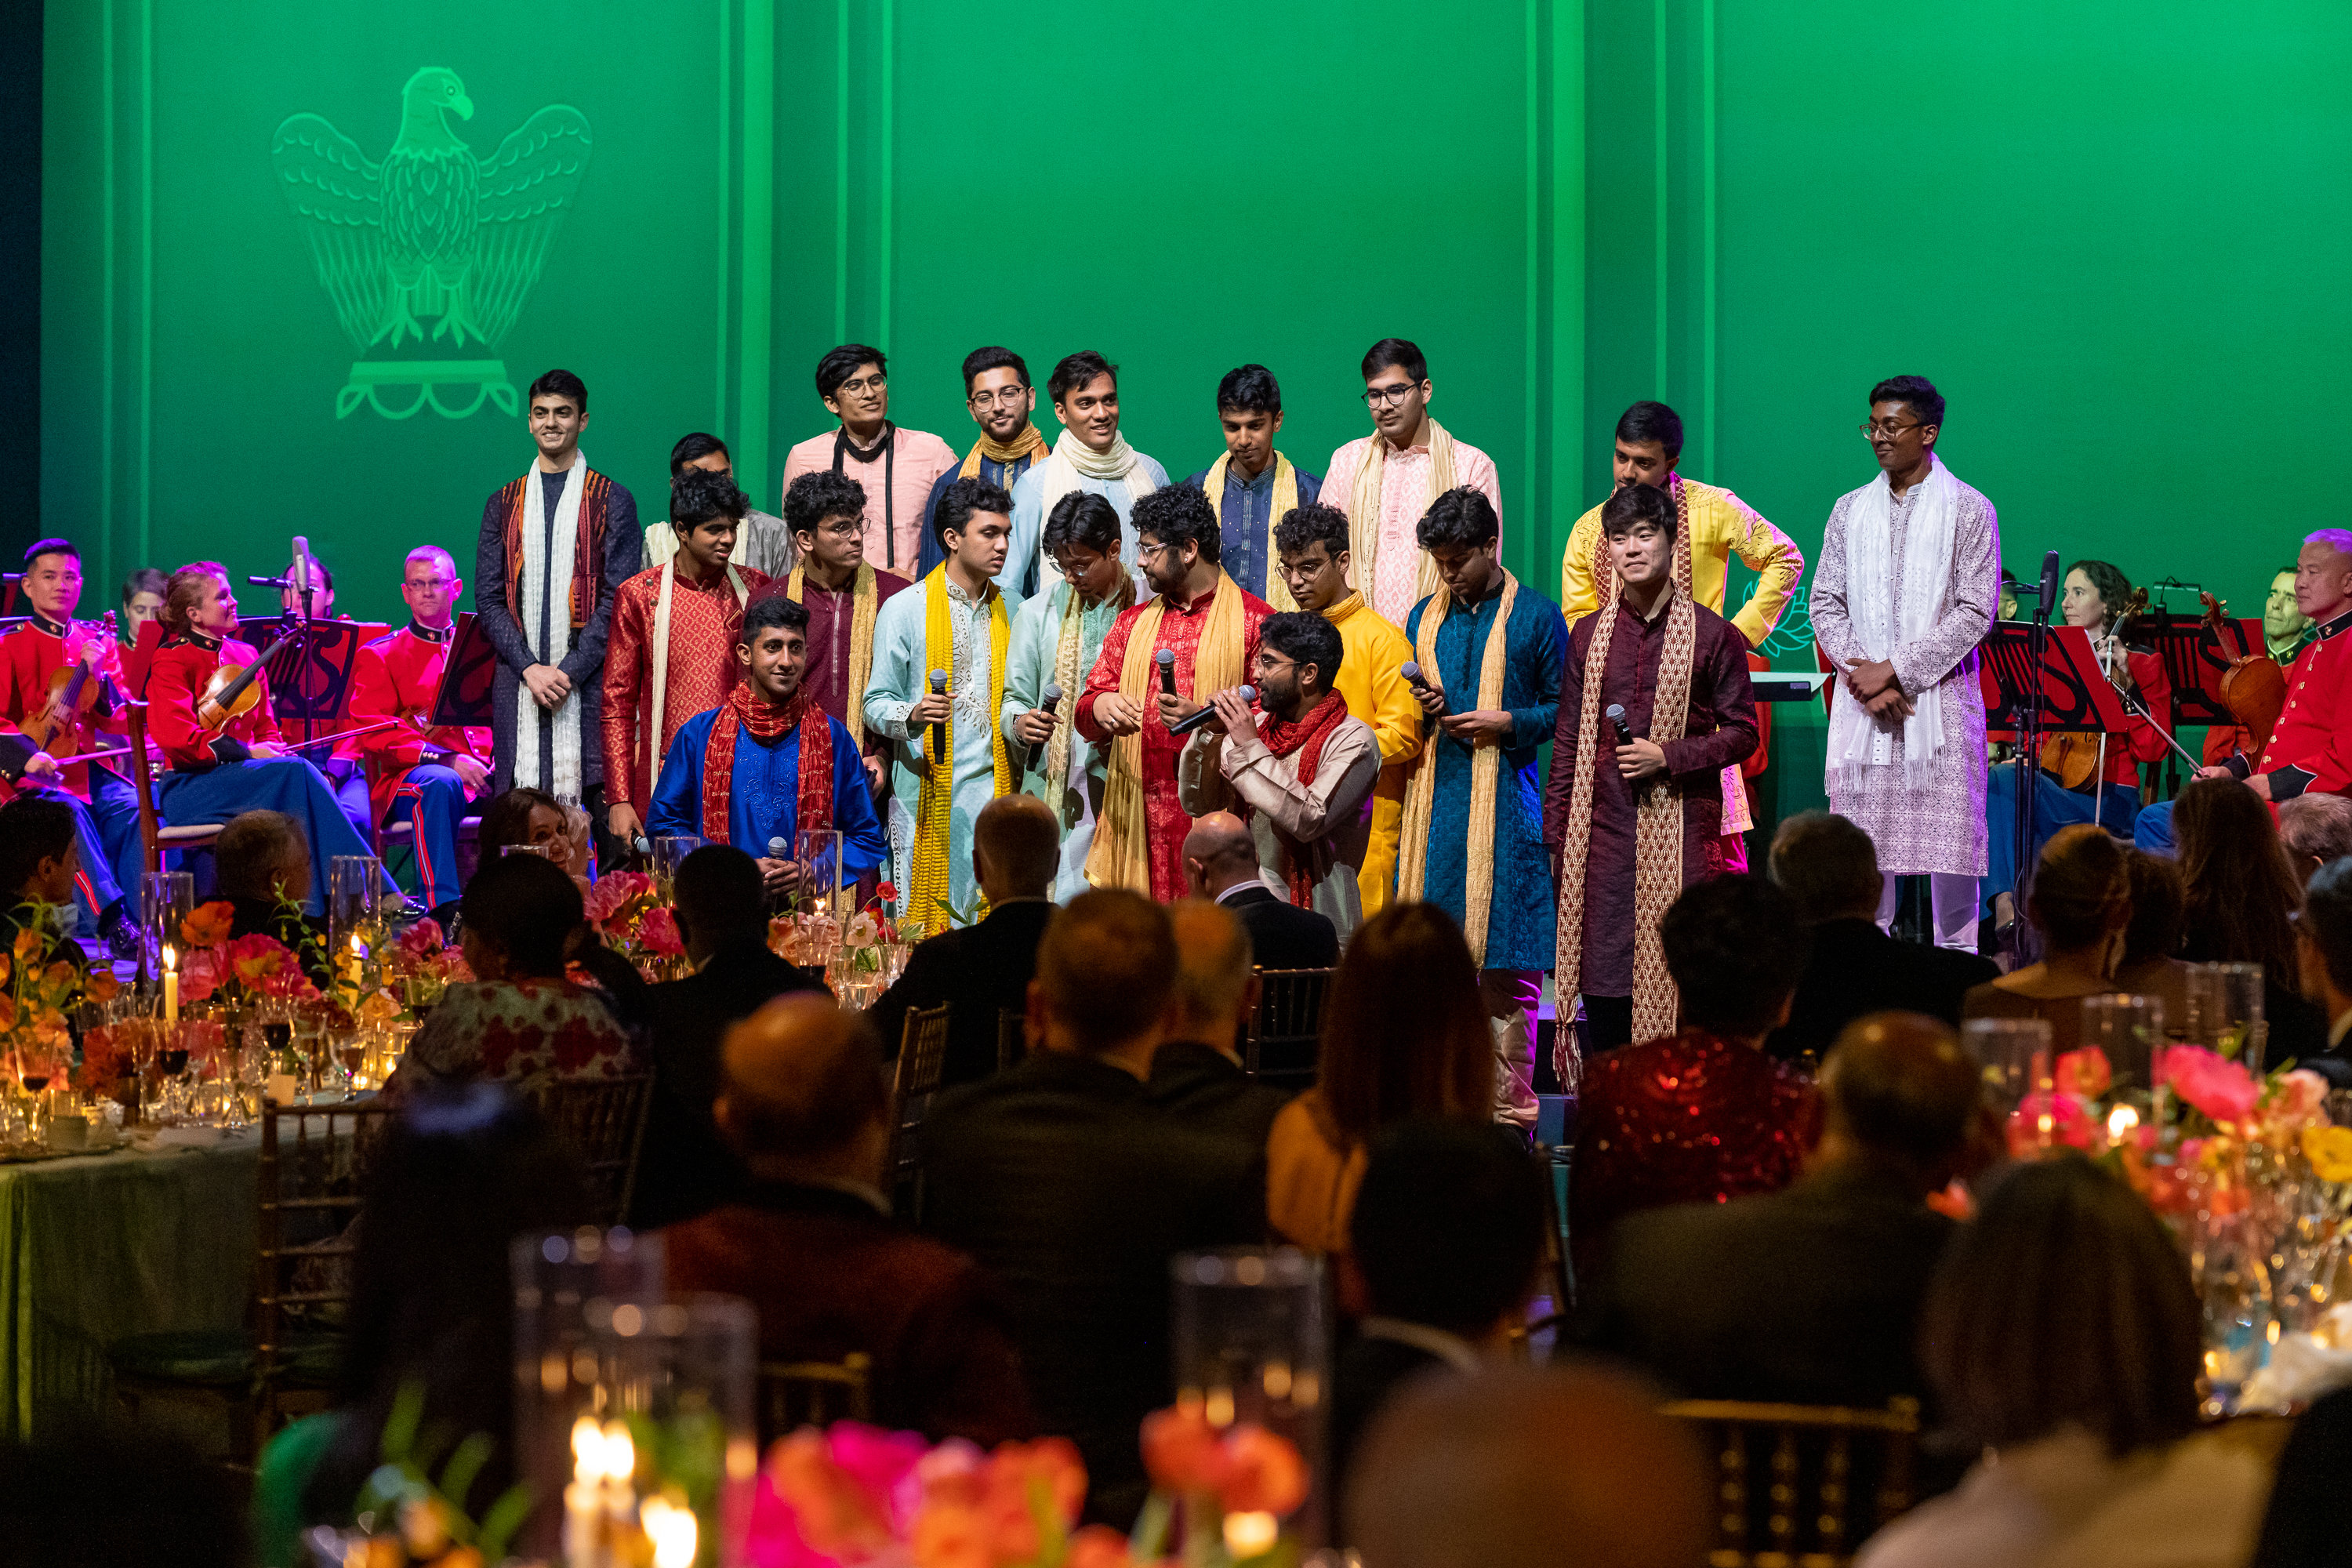 19 students dressed in formal traditional Indian clothing performing at dinner